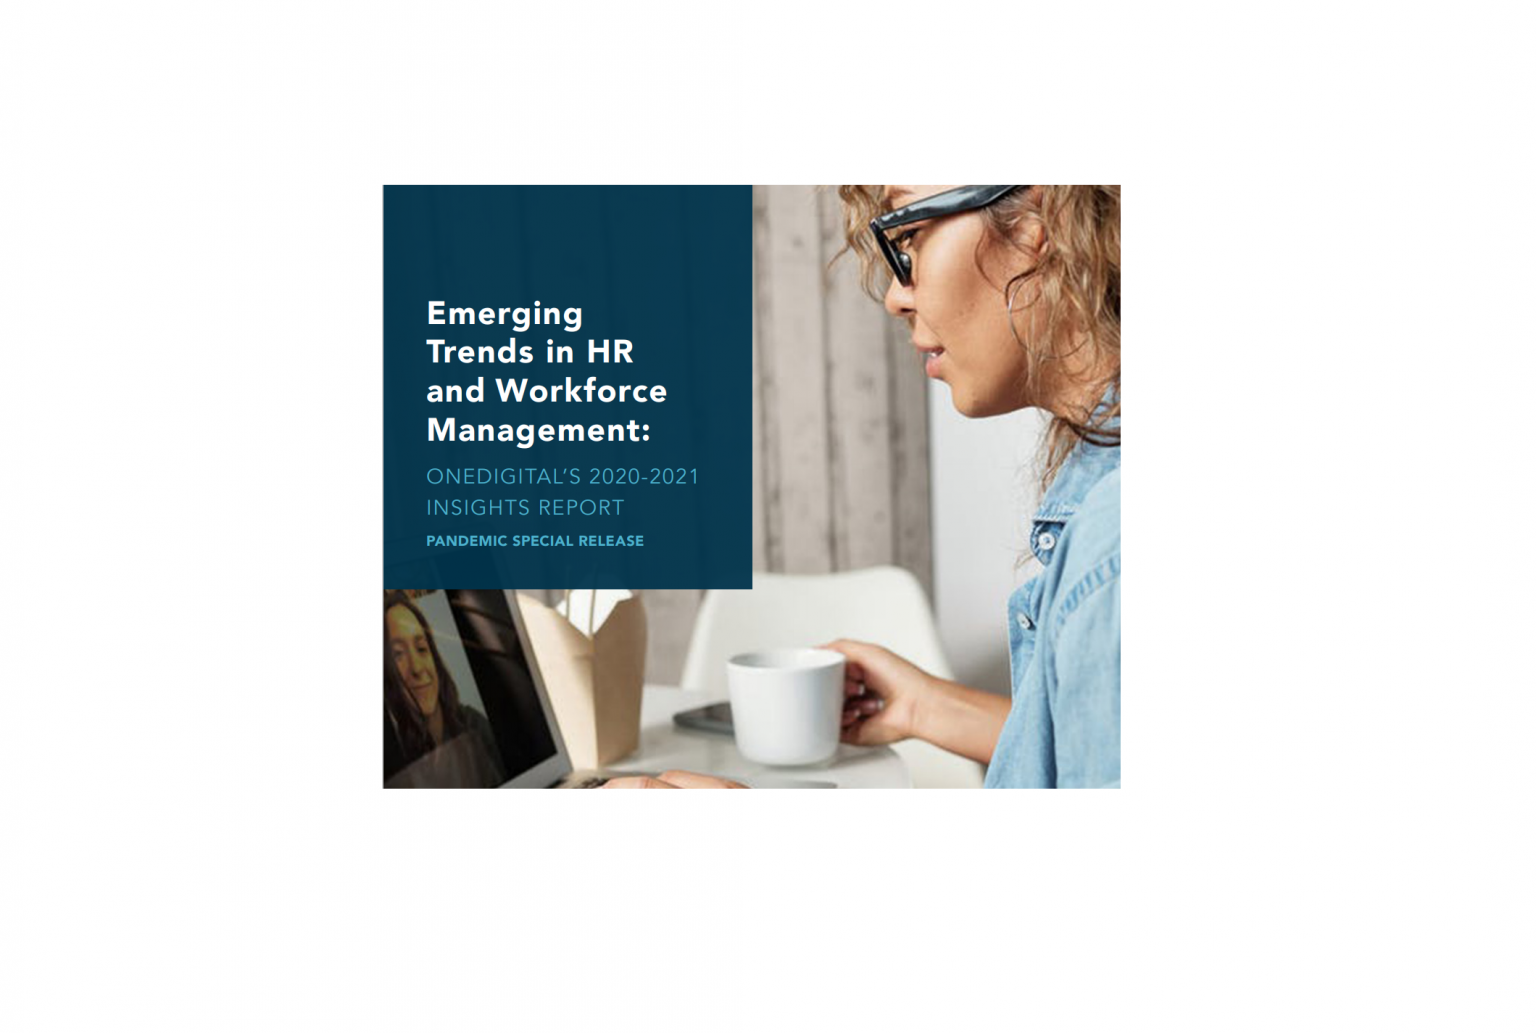 Emerging Trends in HR and Workforce Management 2020 – 2021